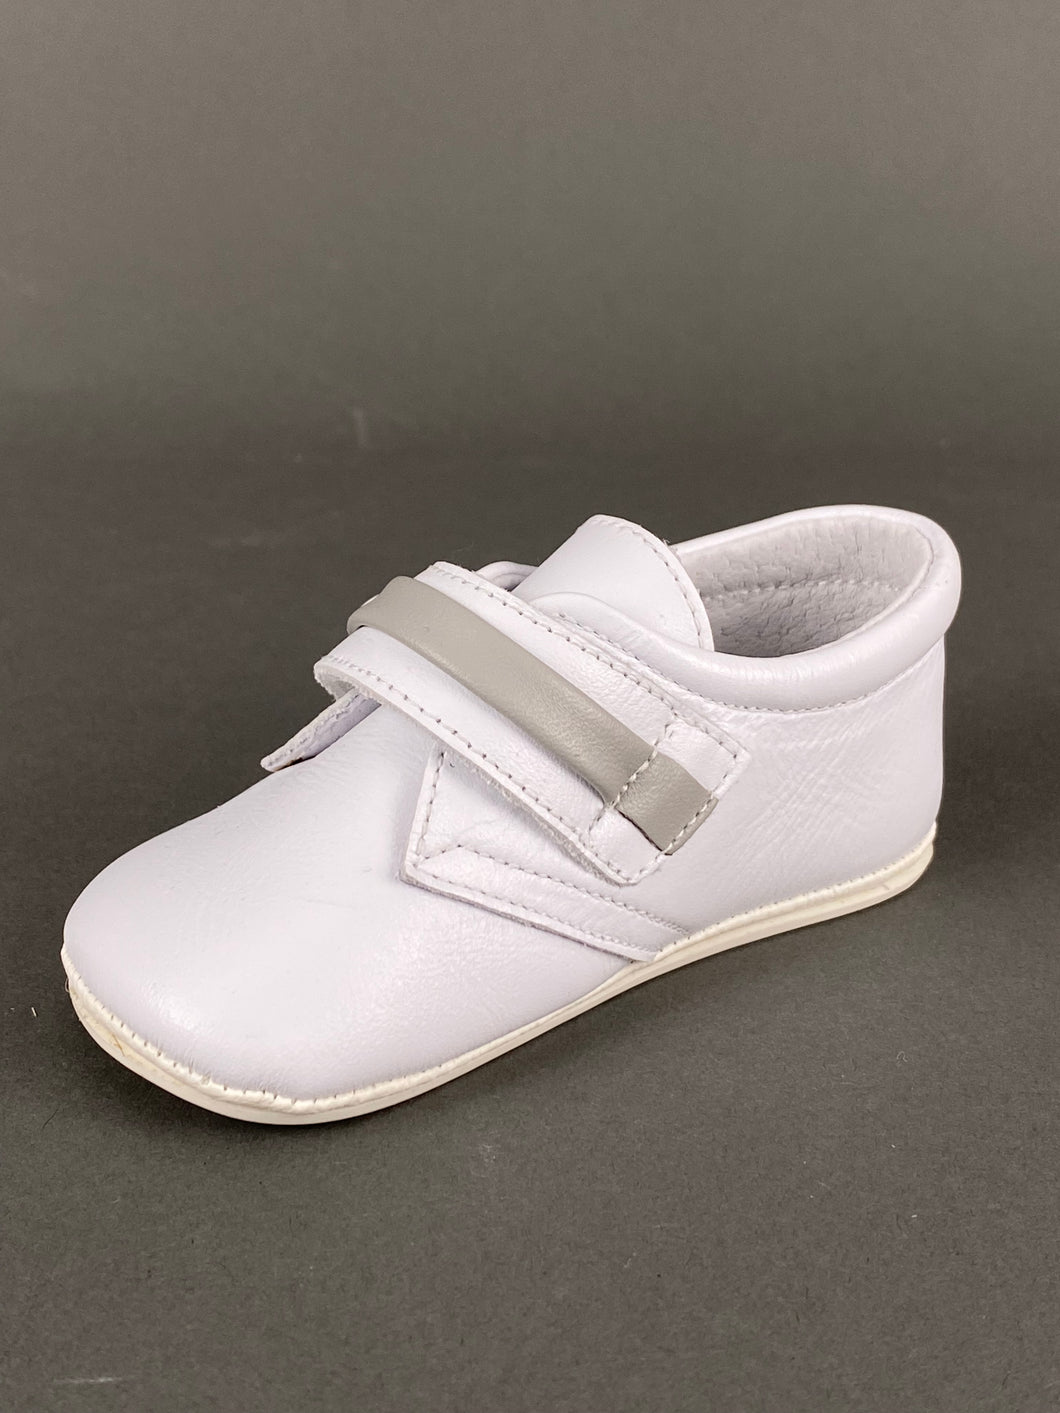 White with Grey Leather Walking Shoe with Velcro Strap